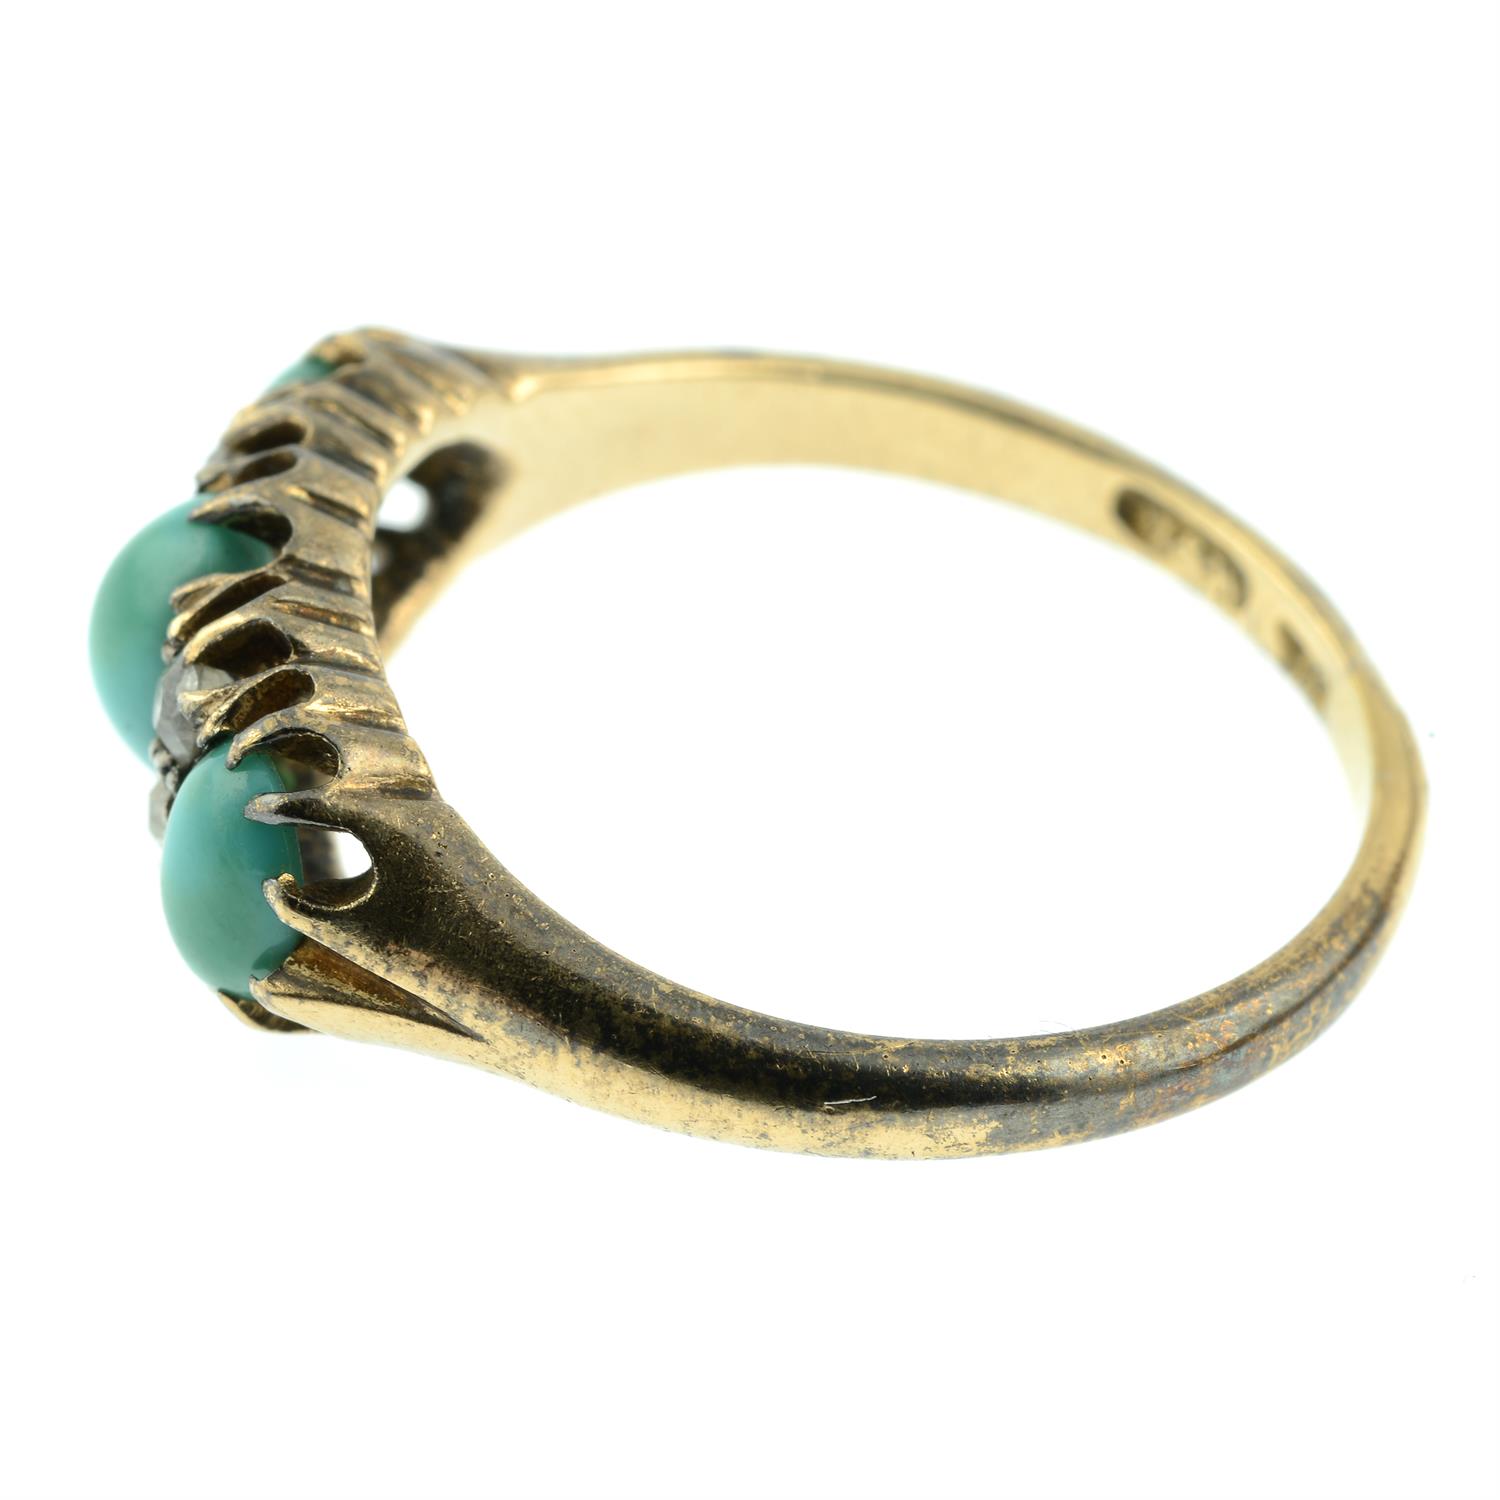 An early 20th century 18ct gold graduated turquoise three-stone ring, with old-cut diamond spacers. - Image 3 of 5